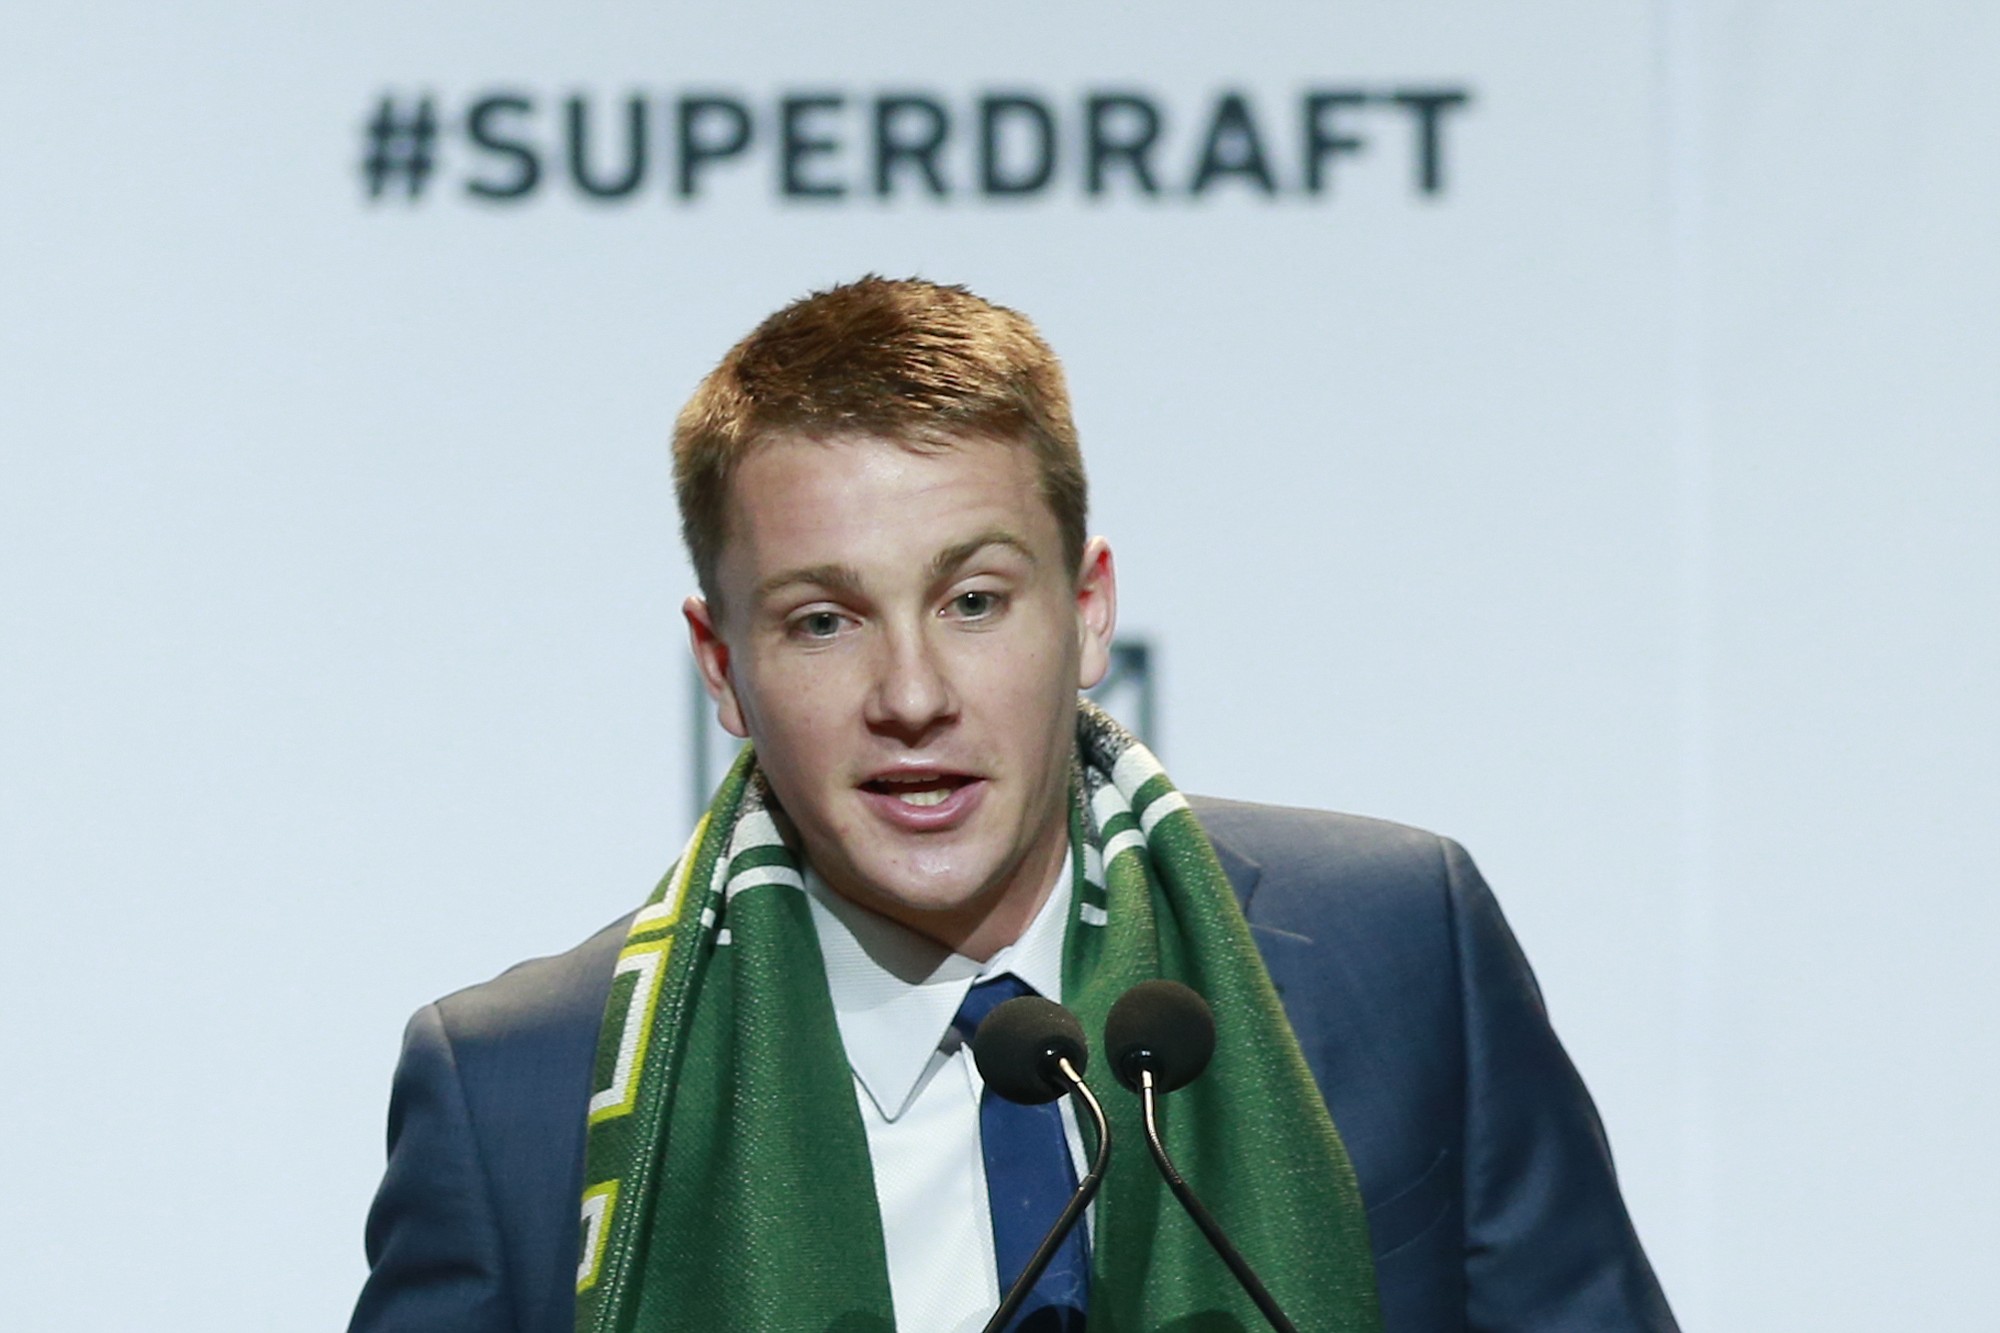 Nick Besler speaks after being selected by the Portland Timbers in the first round of the 2015 Major League Soccer SuperDraft, Thursday, Jan. 15, 2015, in Philadelphia.